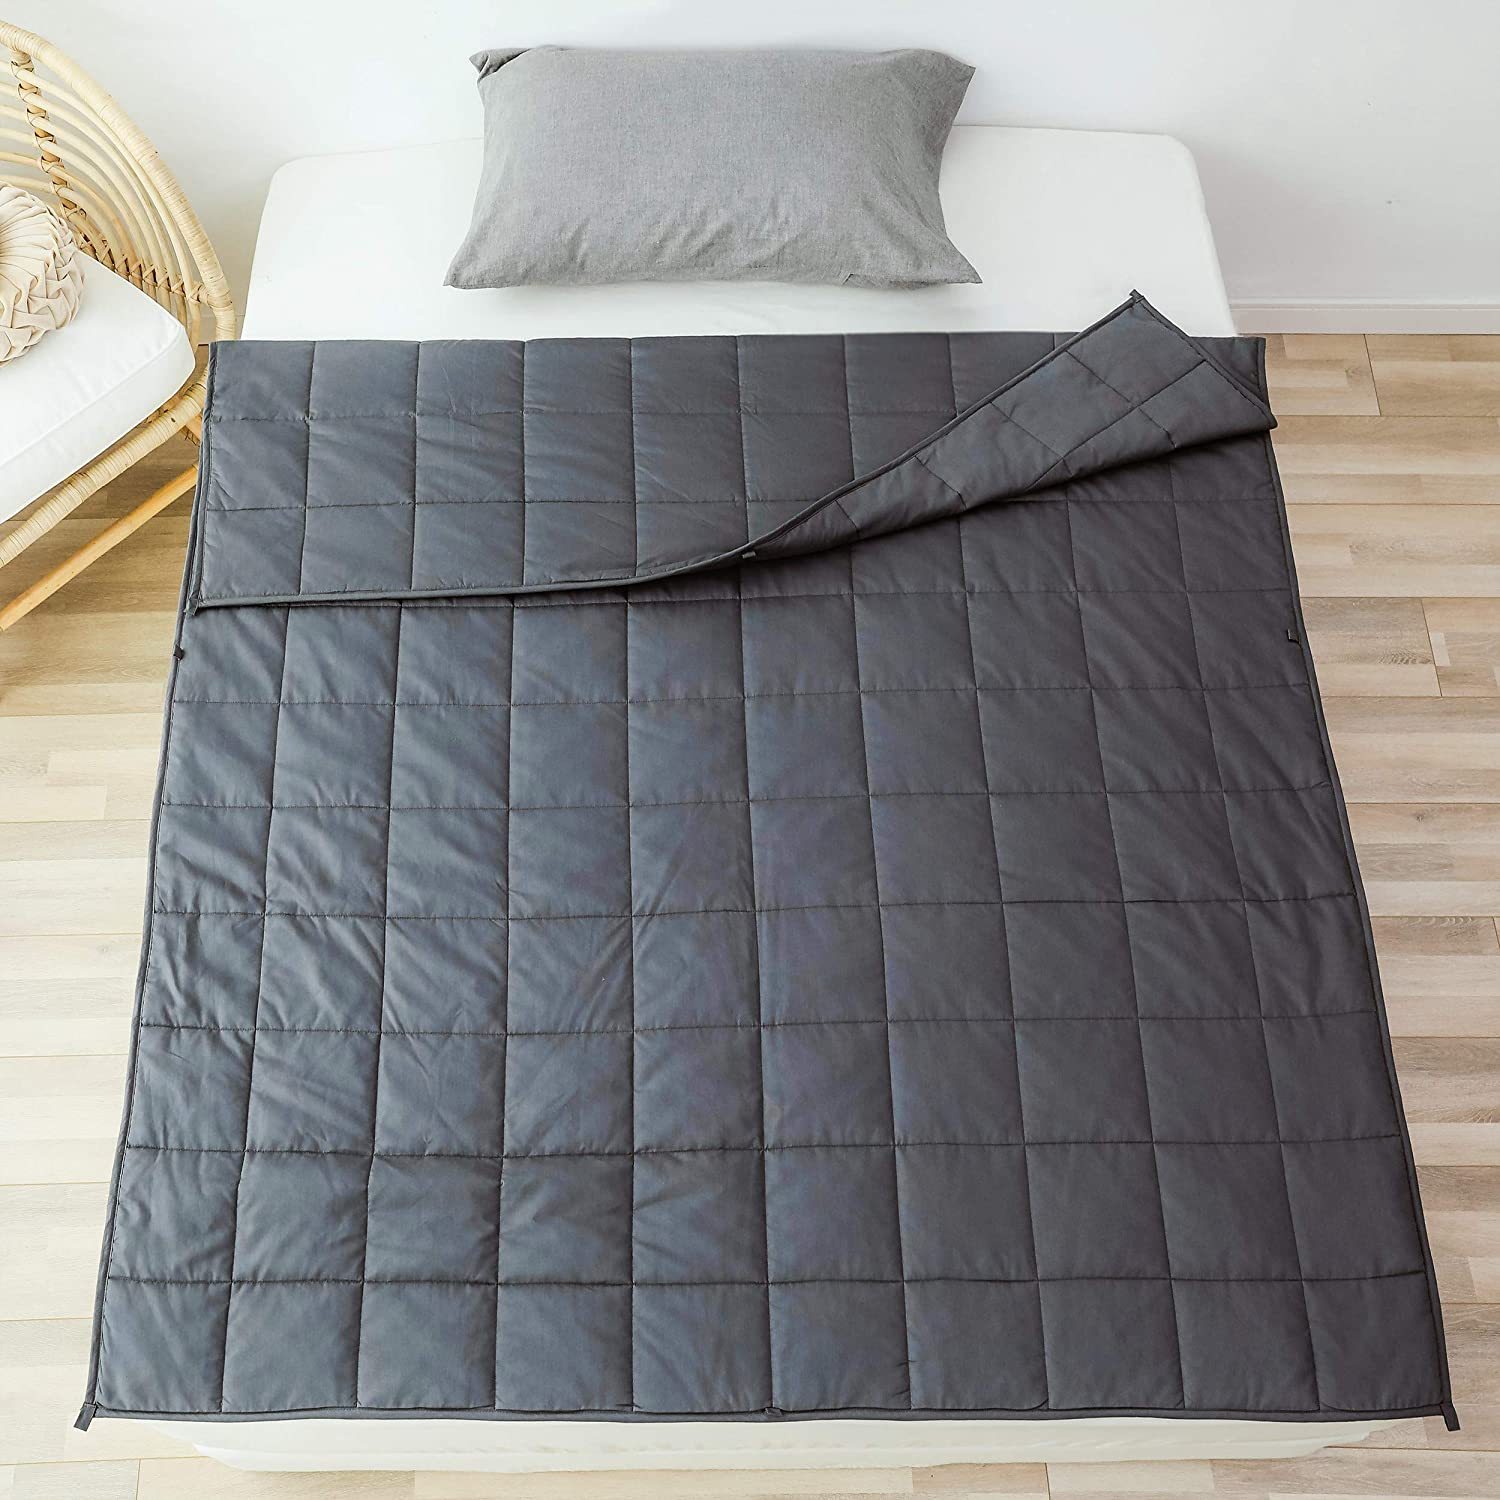 US$ 280.00 - Weighted Blanket King Size 20 lbs 88 x104 | Perfect for